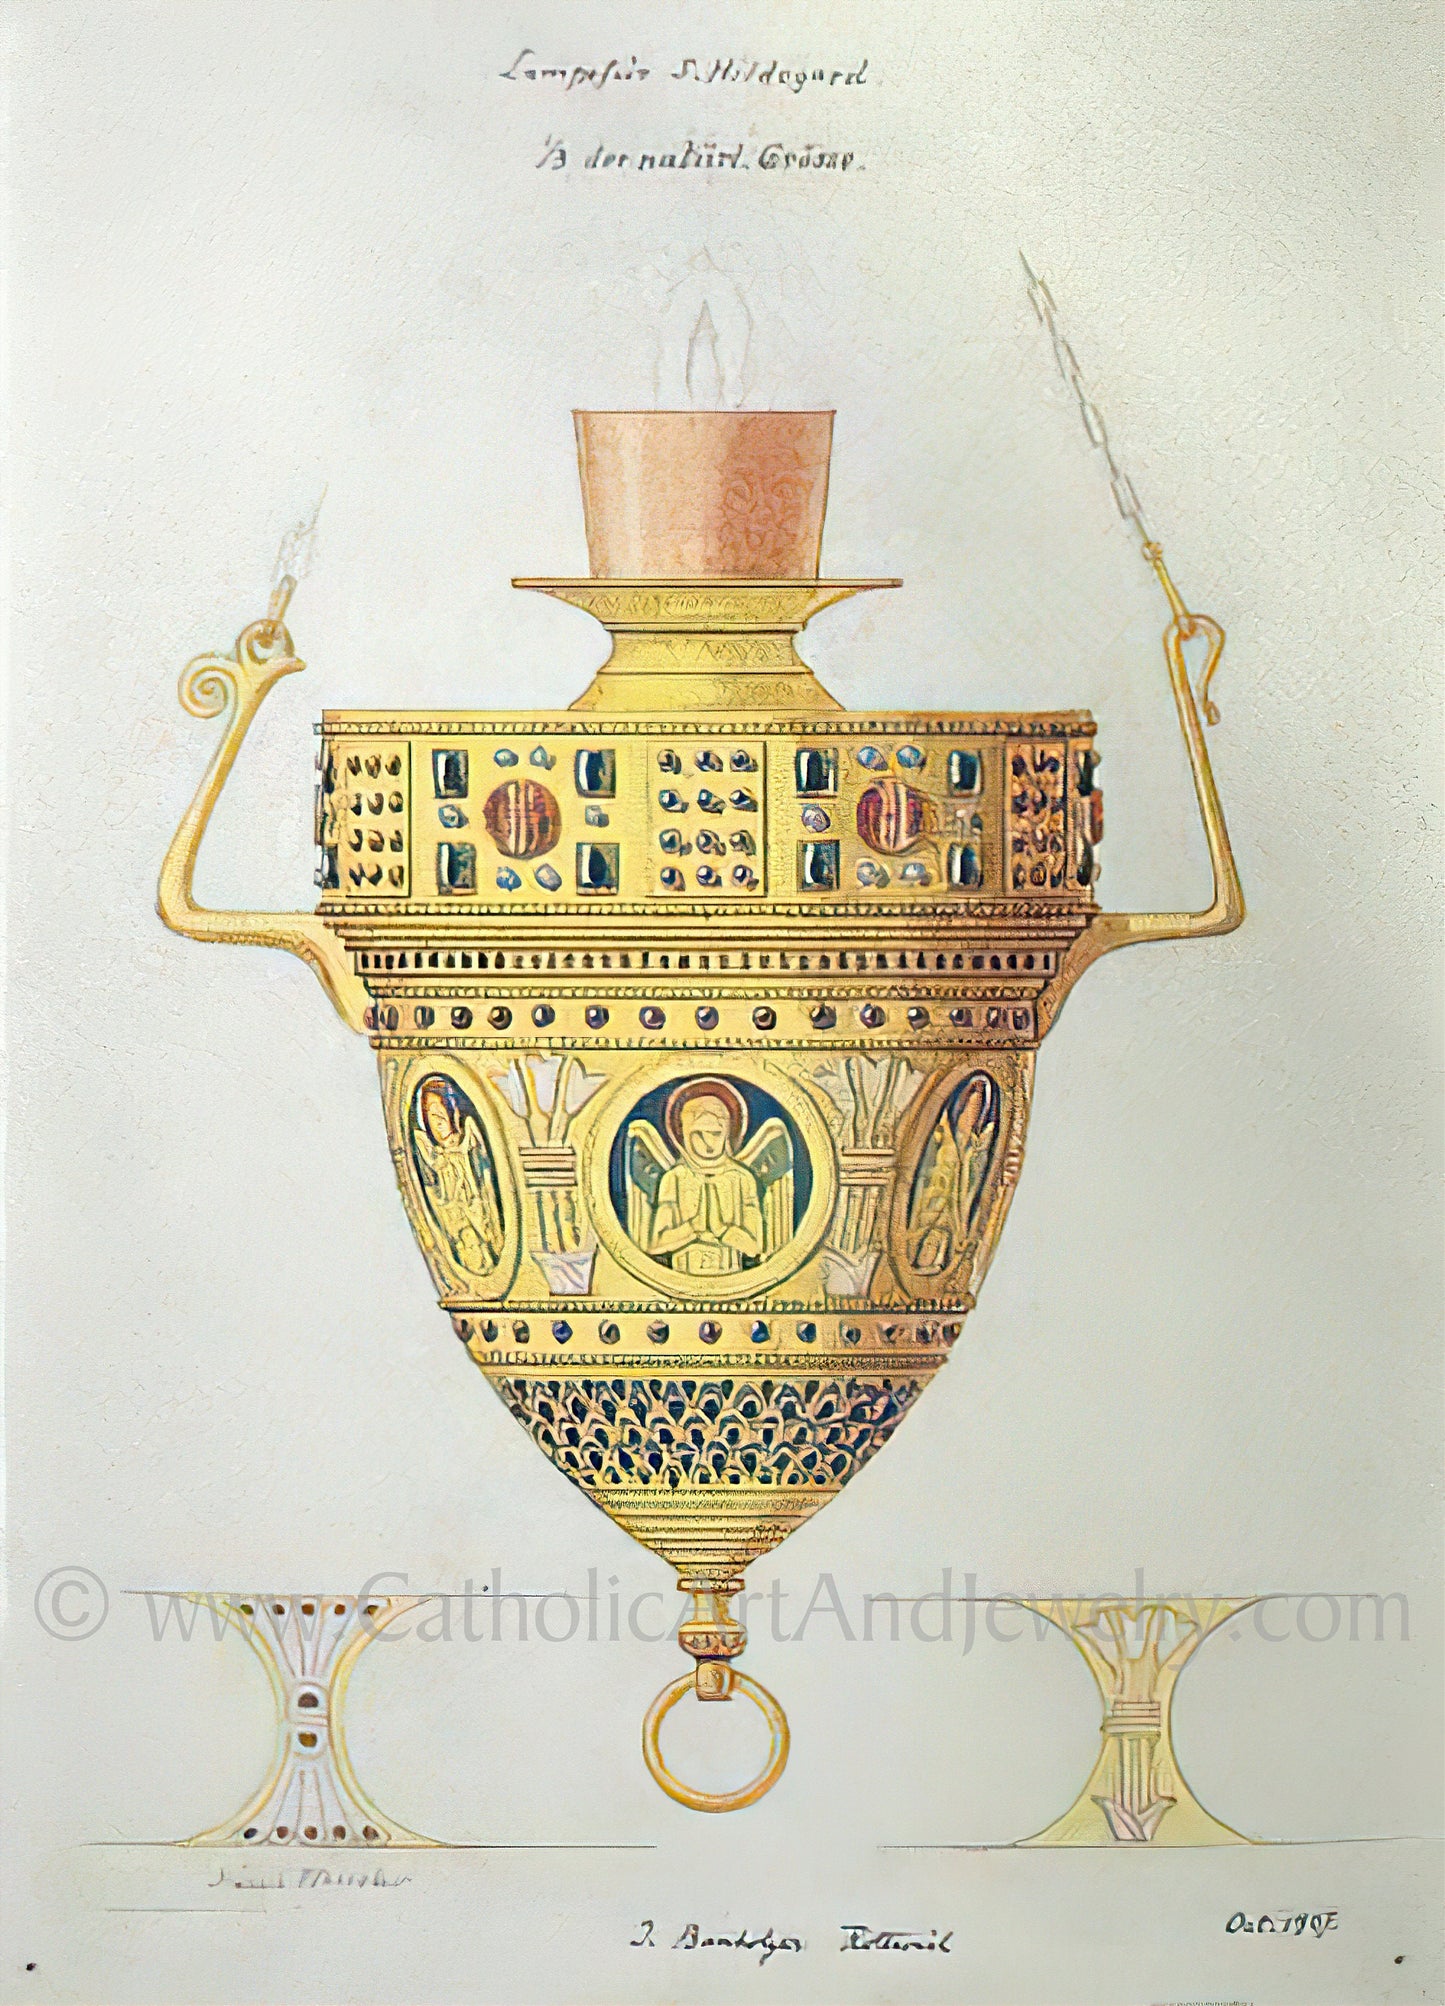 Sanctuary Lamp – from a Benedictine Abbey's design – Catholic Art Print – Catholic Gift – Gift for Priest